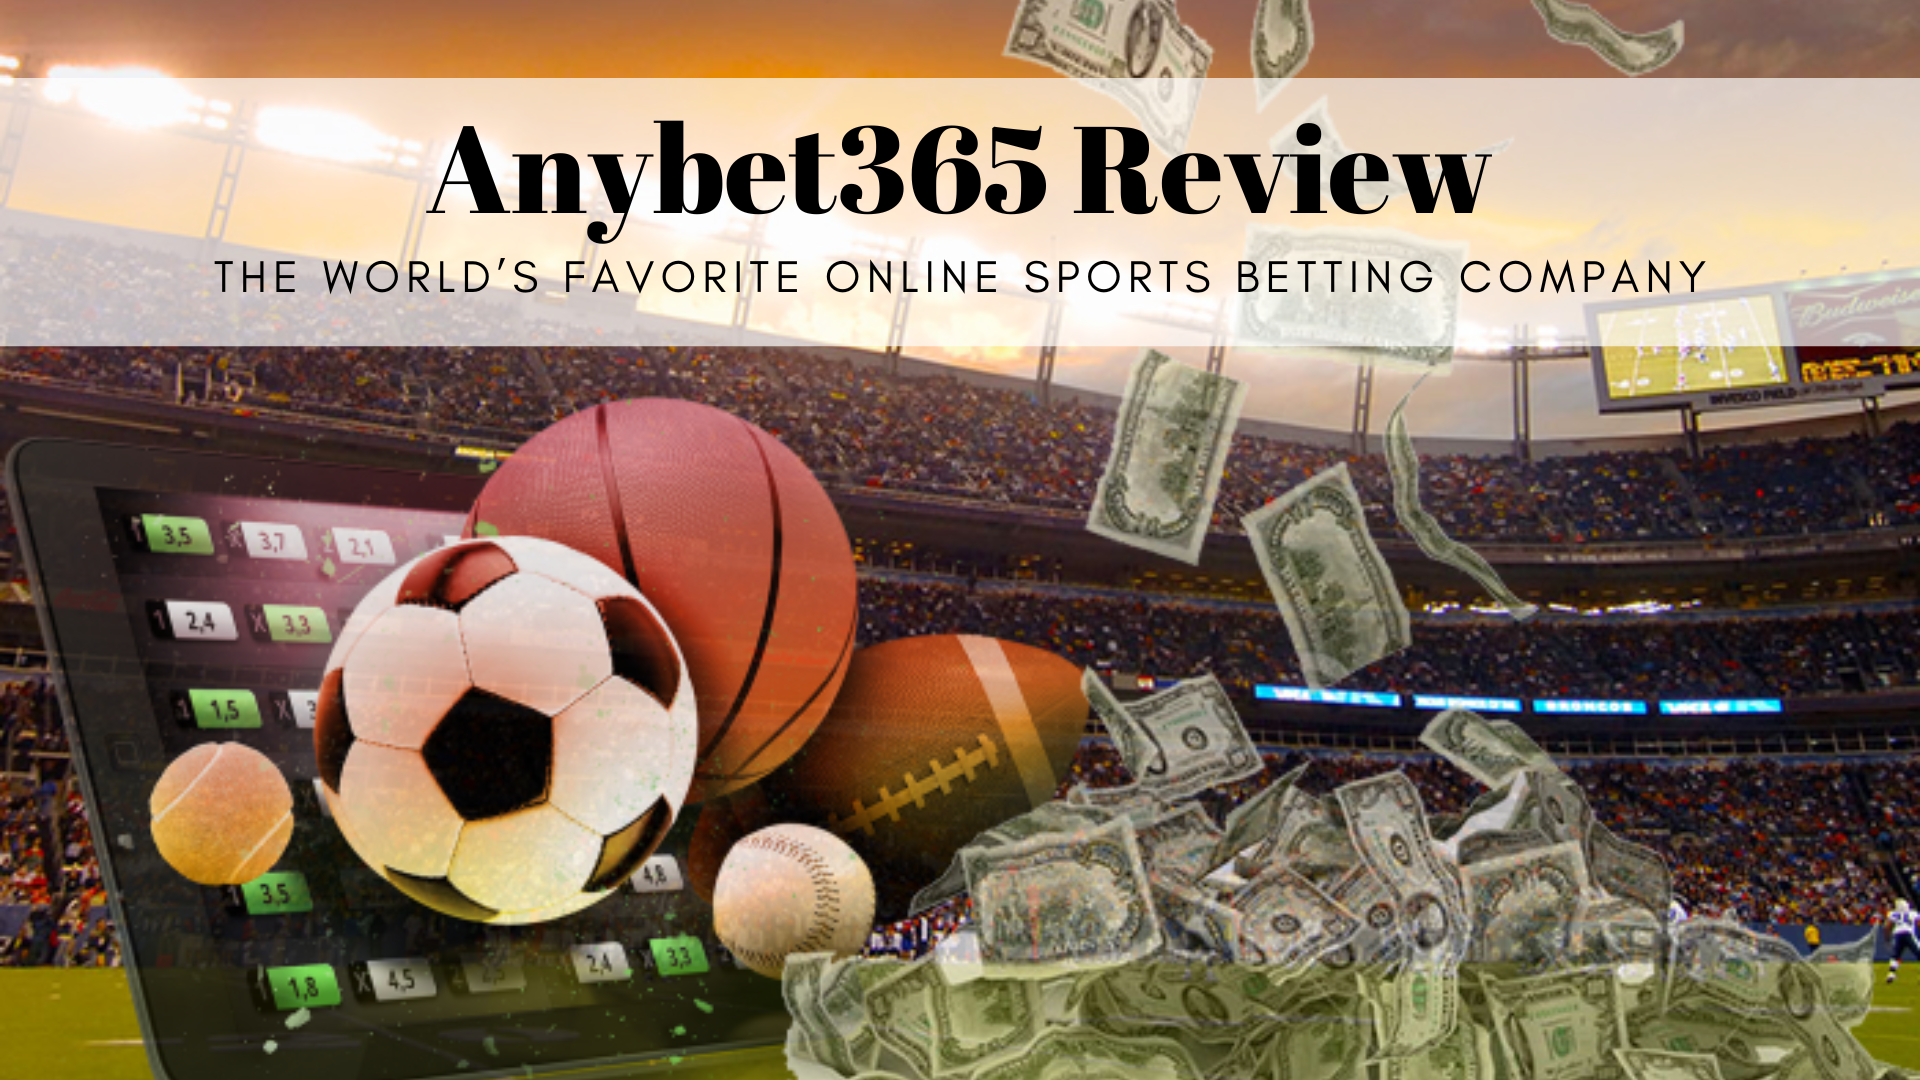 Anybet365 Review - The World’s Favorite Online Sports Betting Company